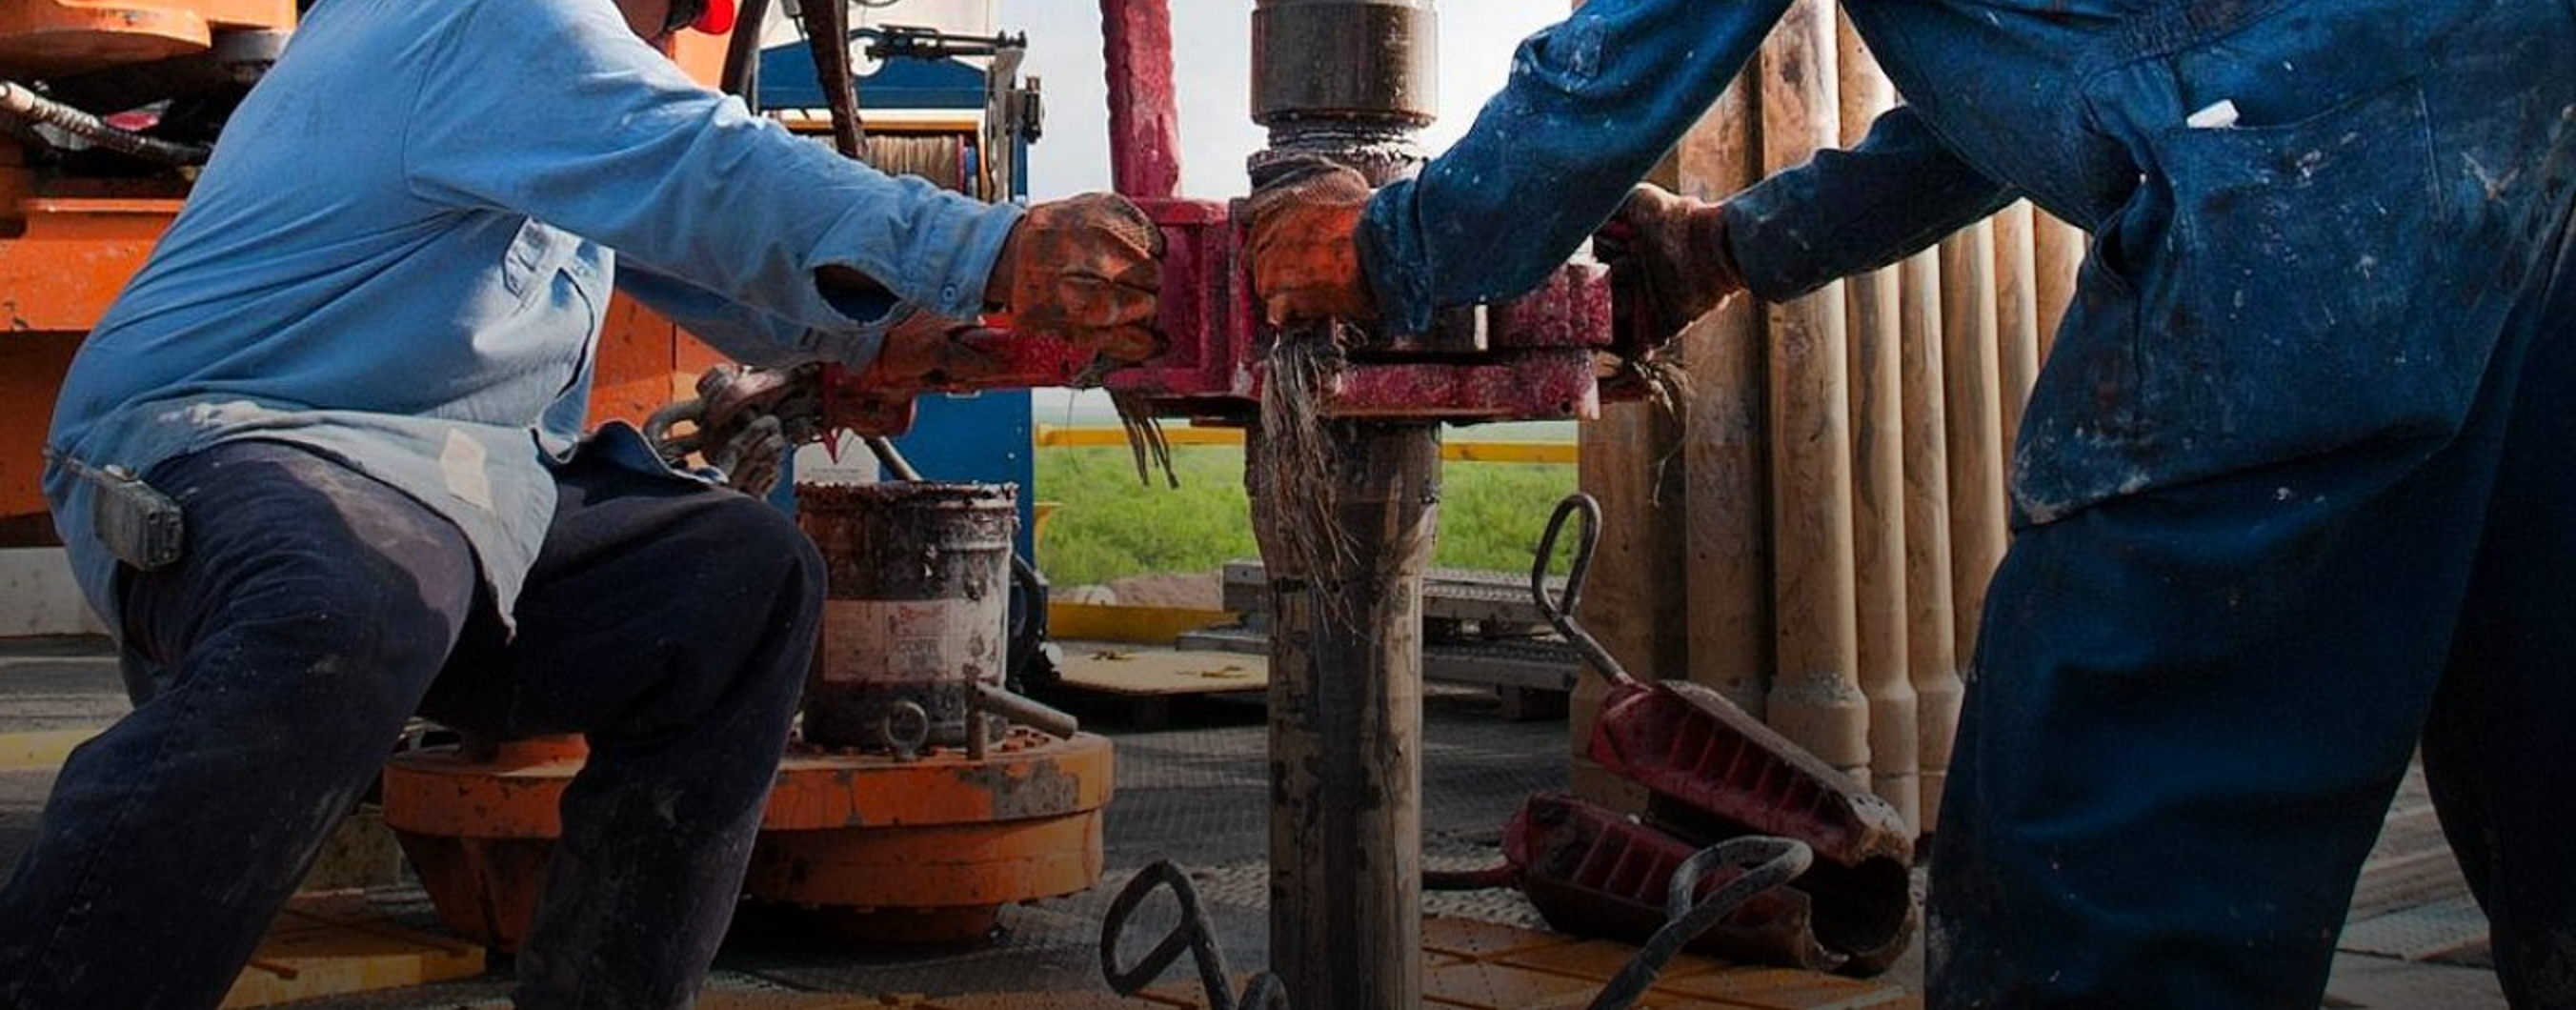 oil-and-gas-industry-could-hire-100-000-workers-if-it-can-find-them